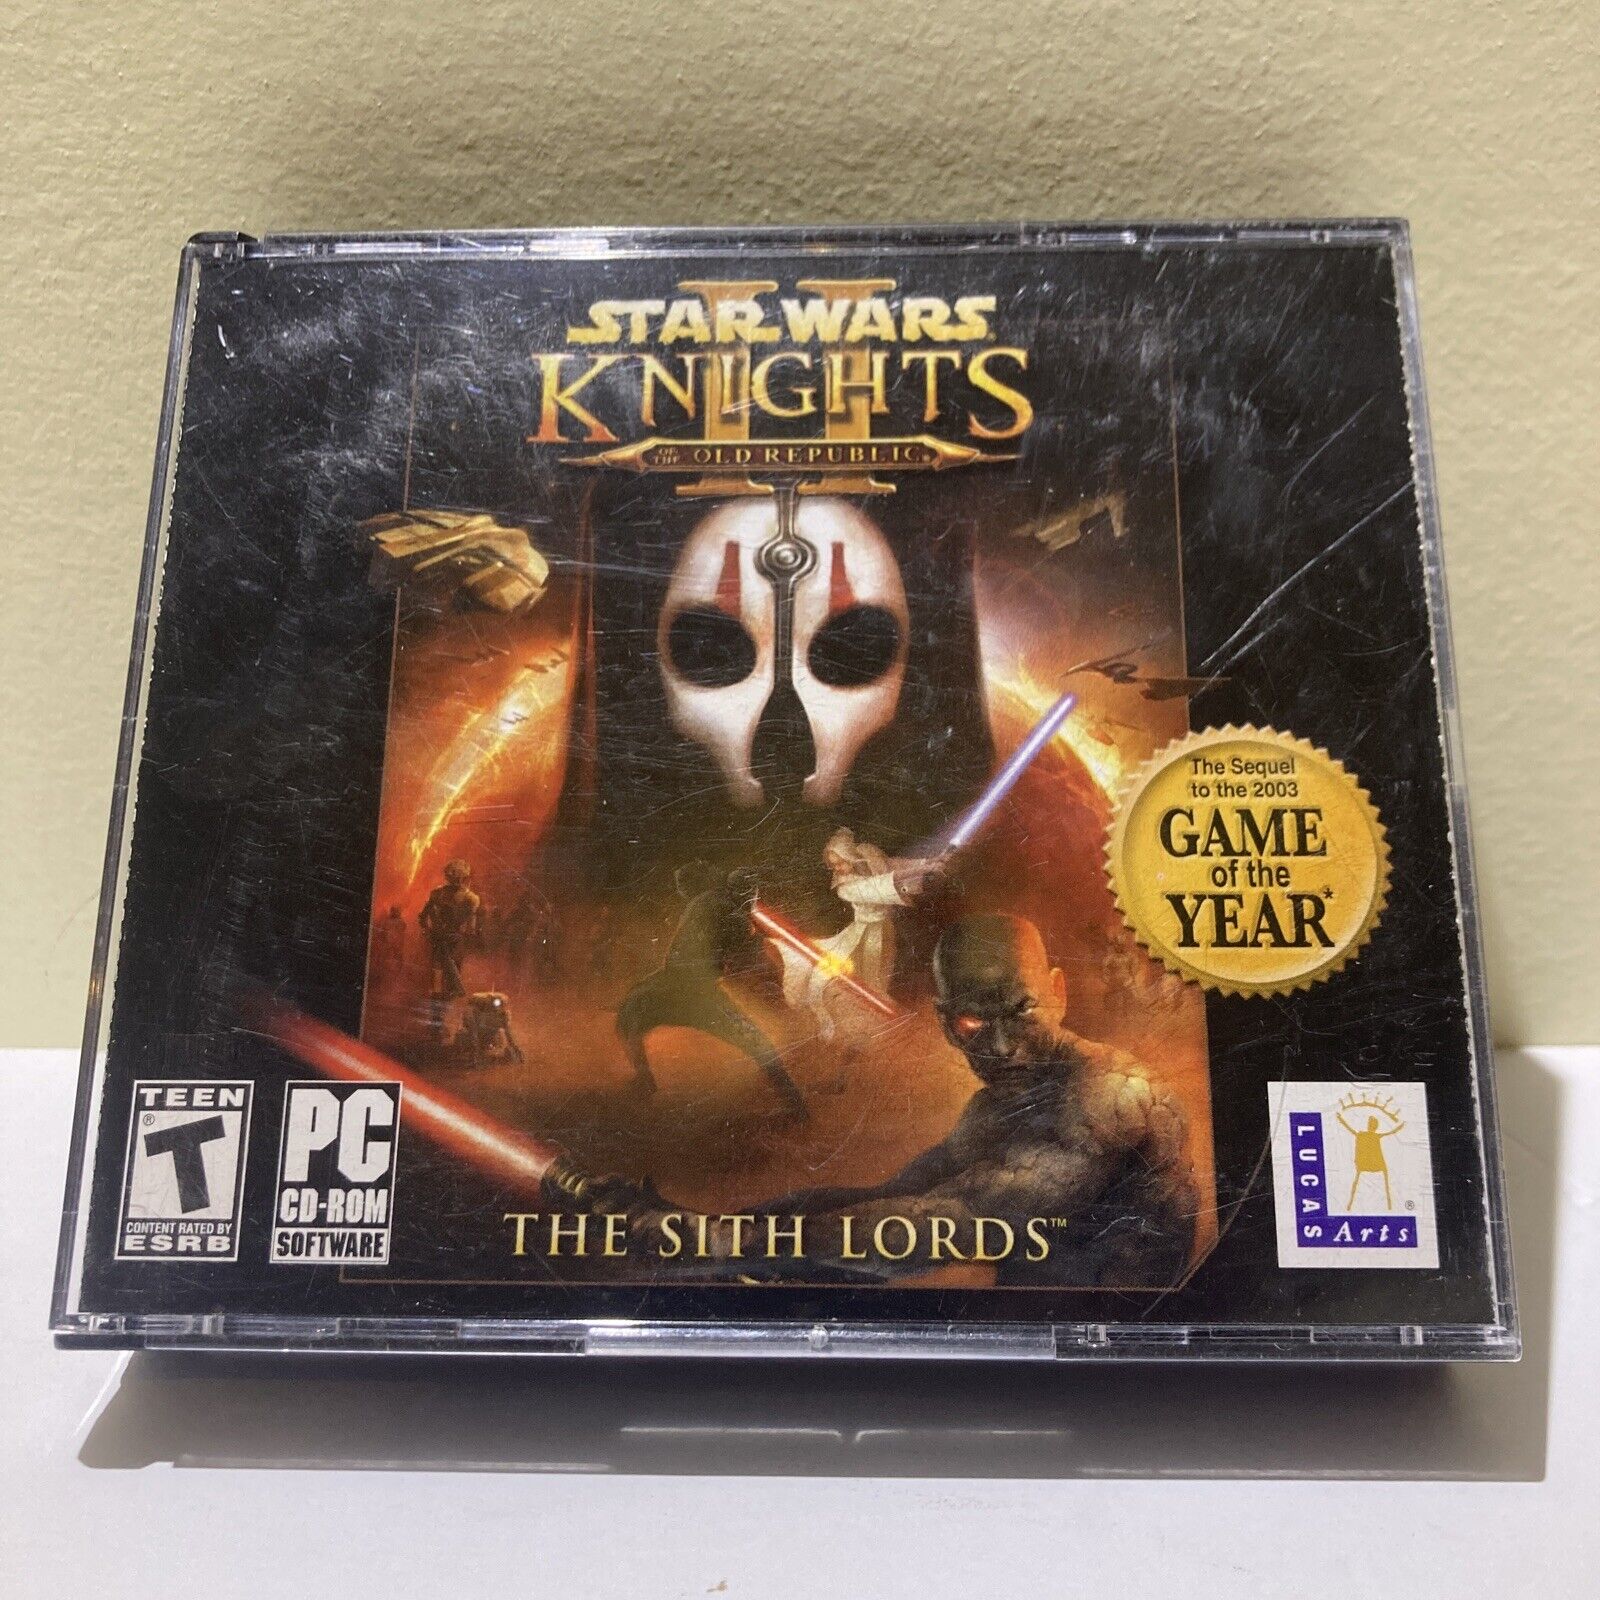 Star Wars Knights Of The Old Republic II The Sith Lords (PC, 2004) CD-ROM-4 Disc